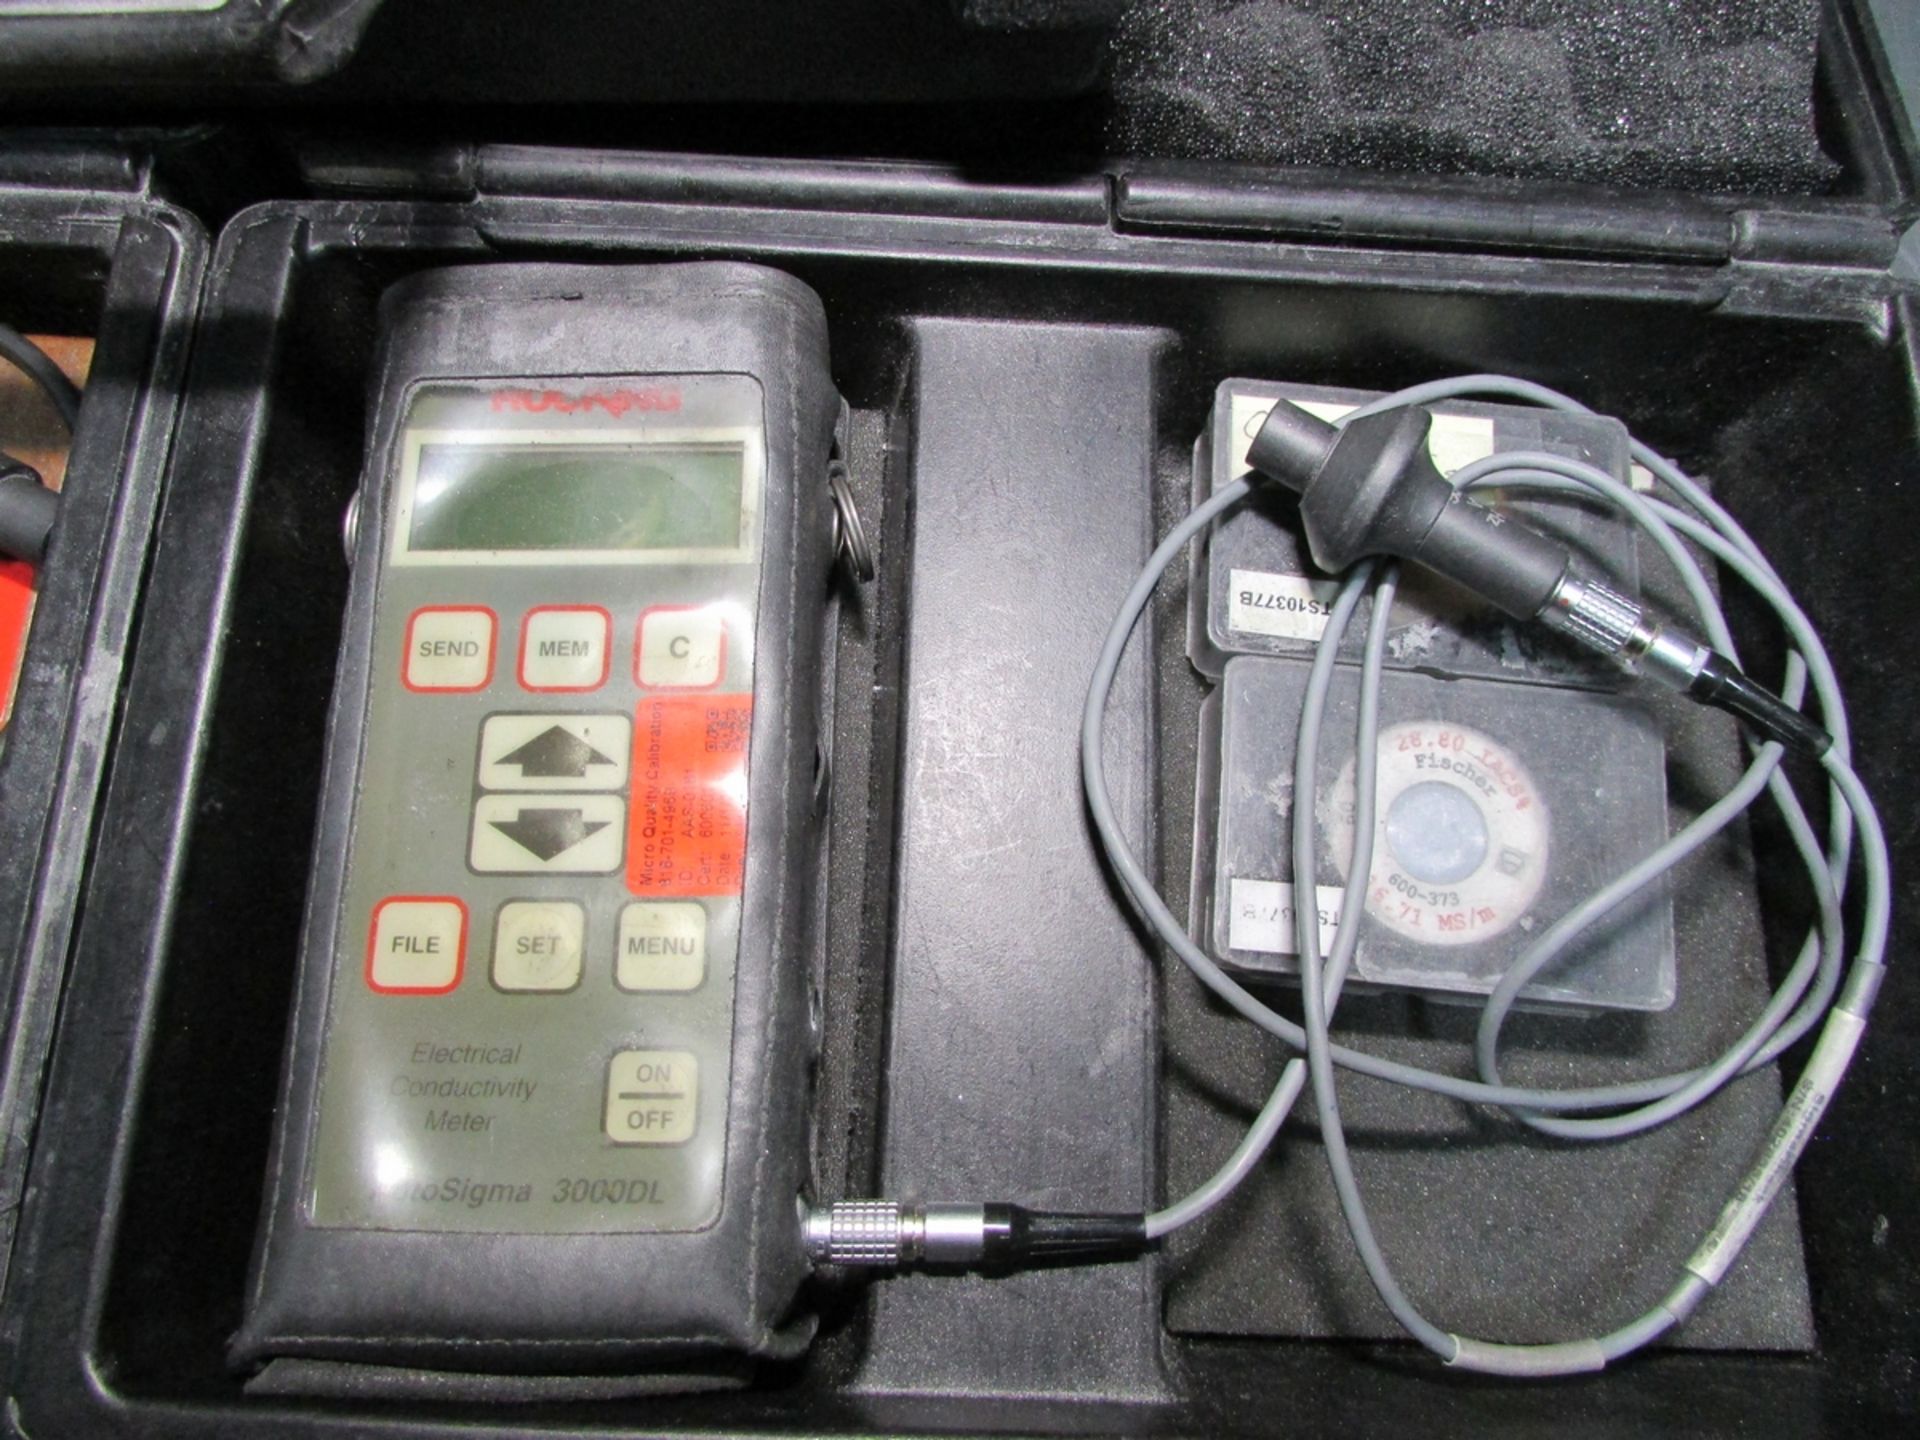 LOT - (3) HOCKING ELECTRICAL CONDUCTIVITY METERS, MODEL AUTOSIGMA 3000DL - Image 3 of 5